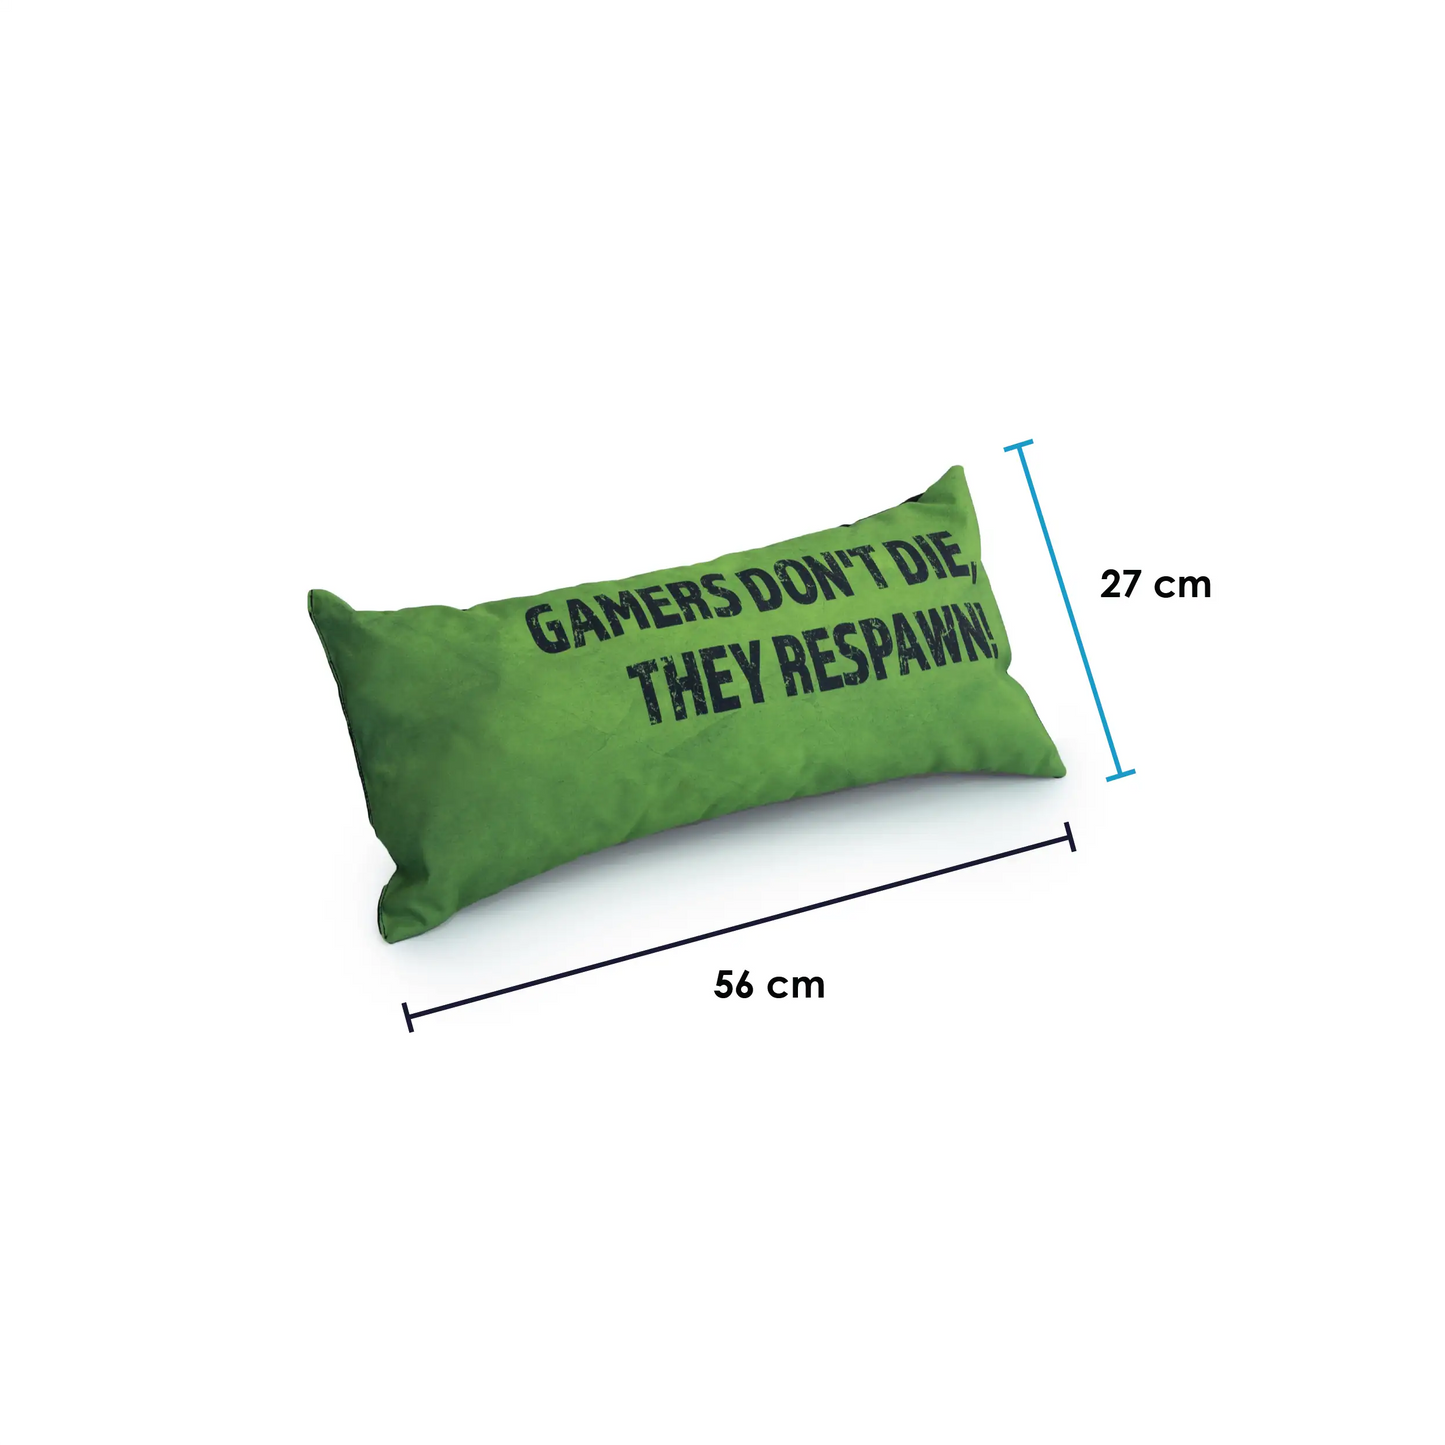 A fluffy green pillow with the text "gamers don't die, they respawn" written on it in white letters.